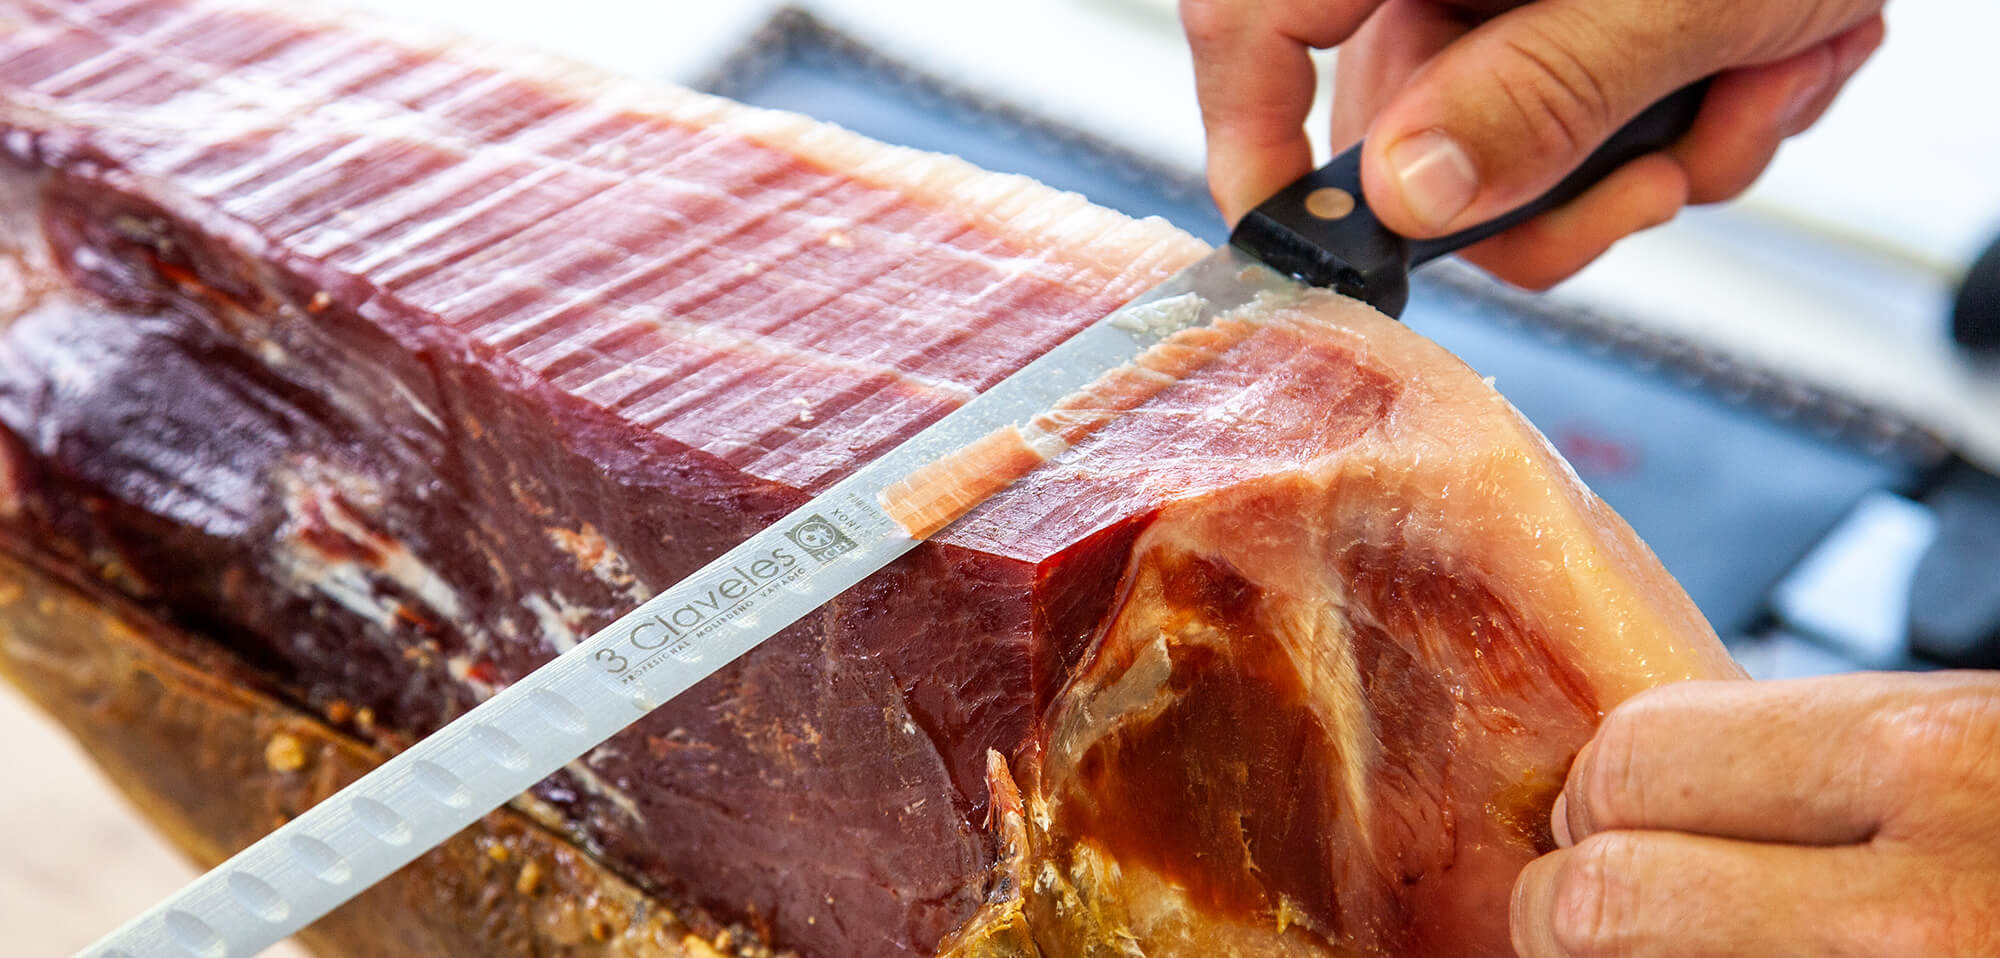 Ham slicing with 3 Claveles knife